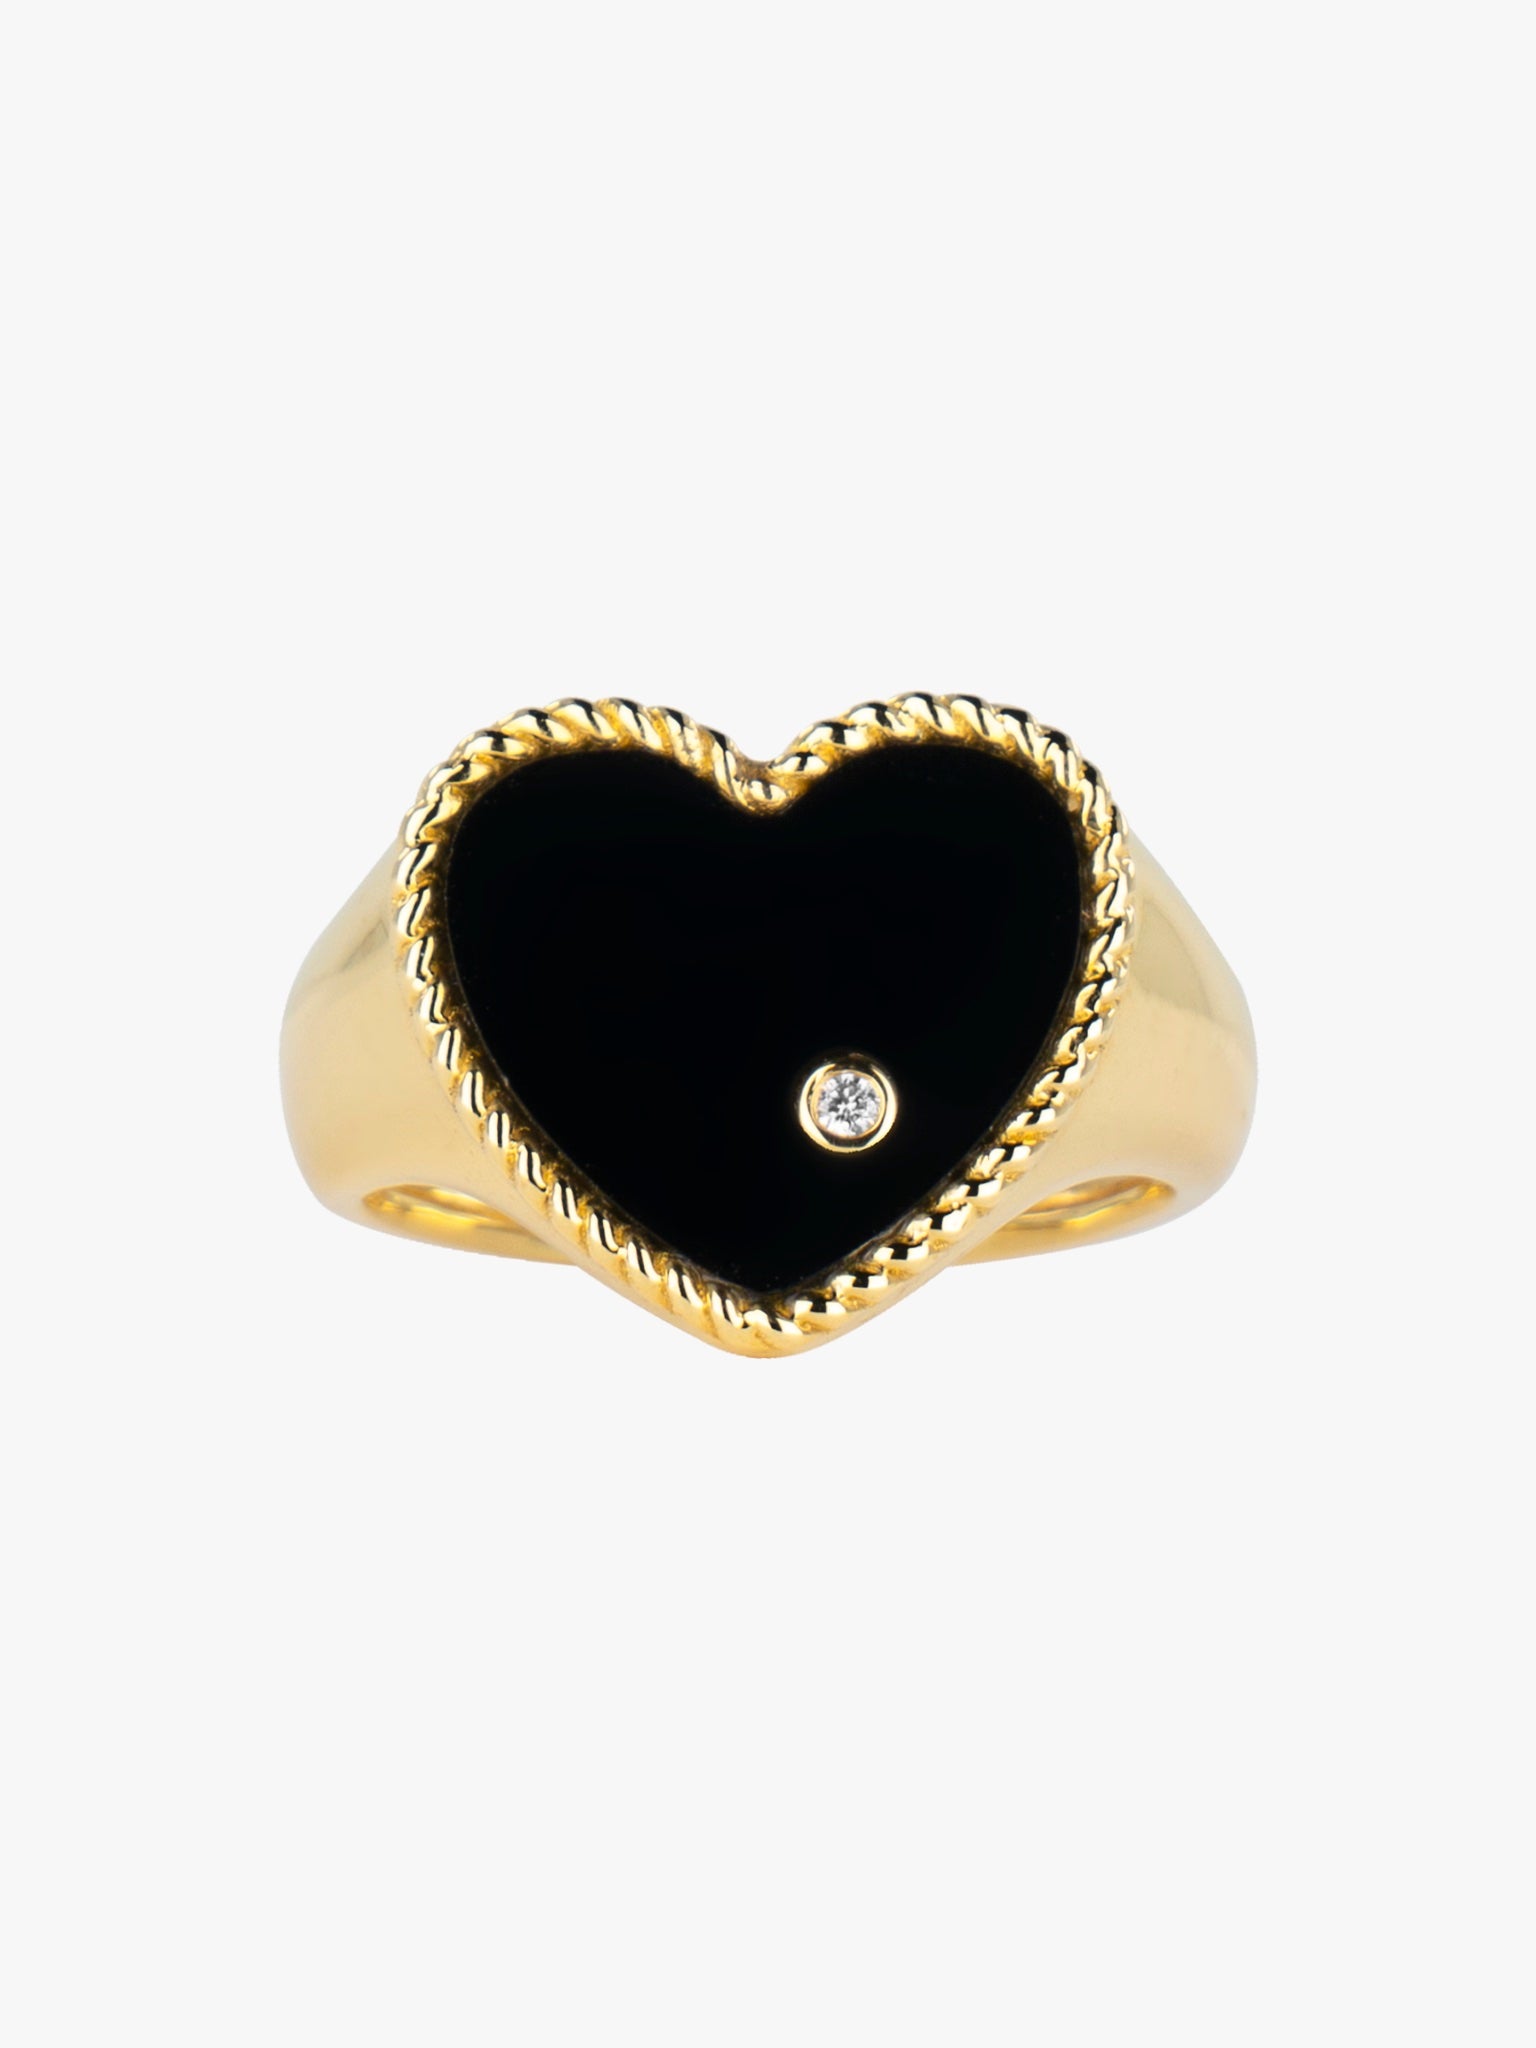 Diamond, onyx and gold heart signet ring